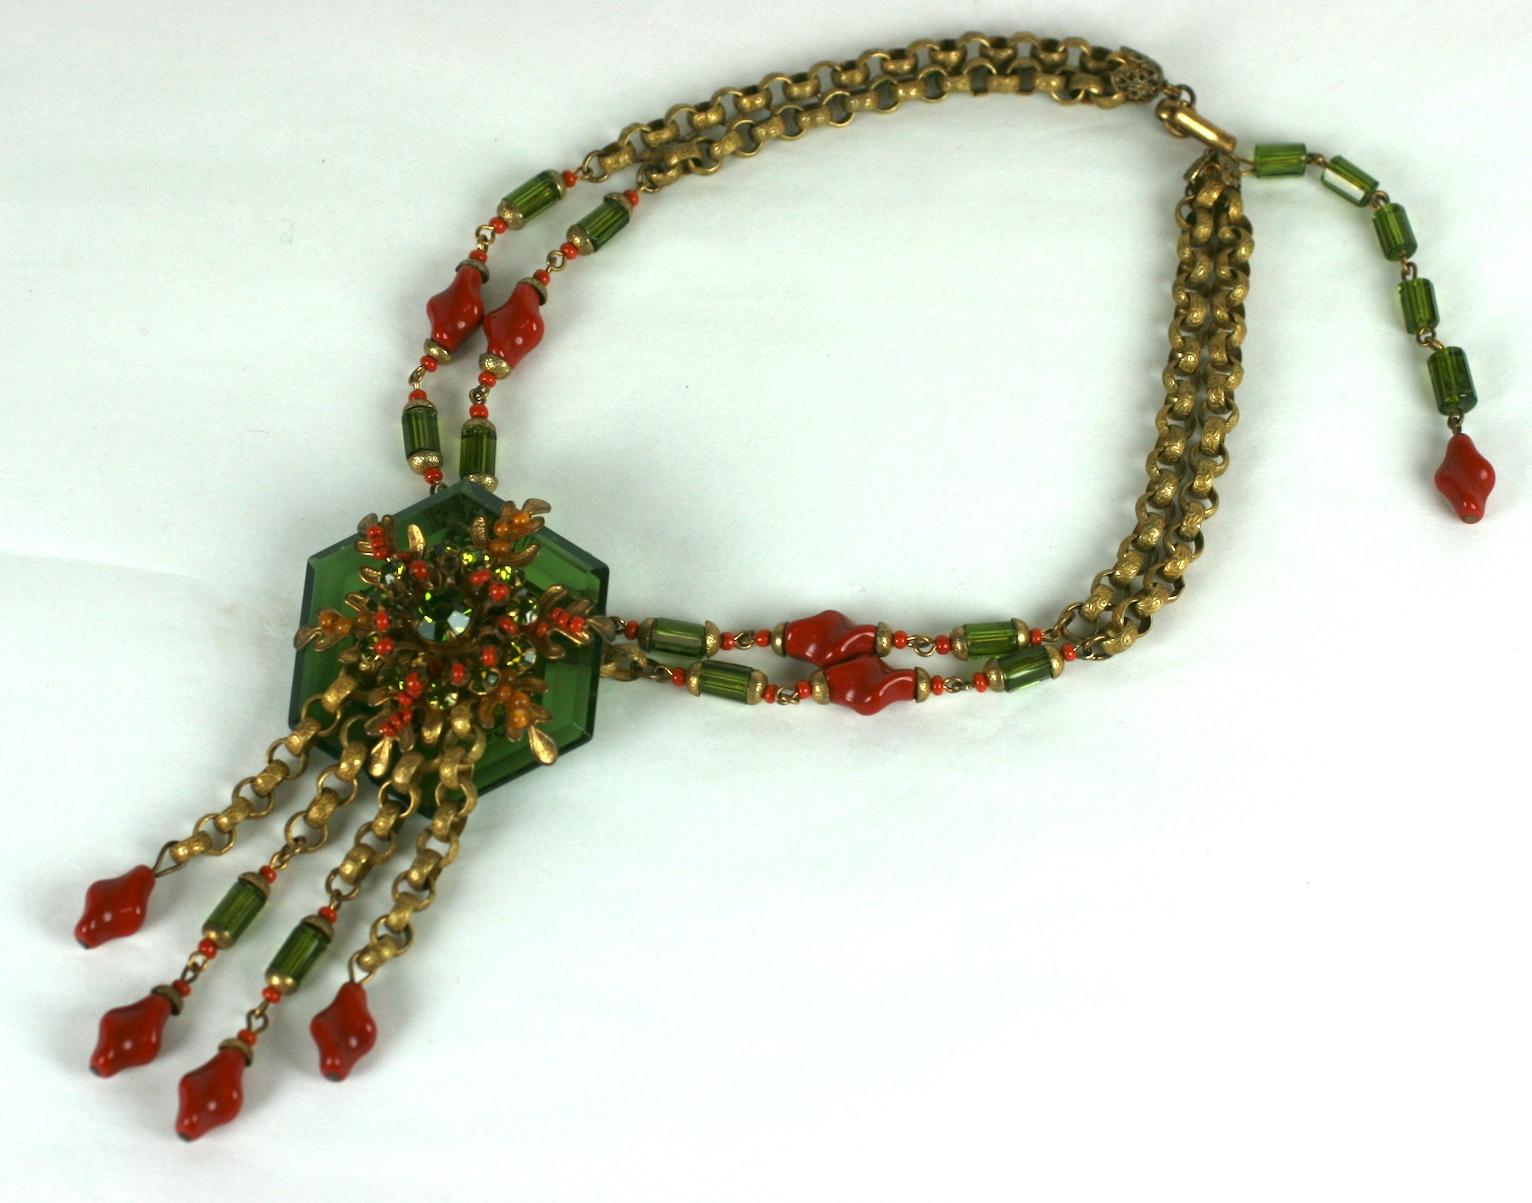 Lovely Miriam Haskell Faceted Crystal Beaded necklace from the 1940's. A large olive green hexagonal crystal is bolted onto a signature Haskell filigree base on the pendant. A dimensional growth of seaweed leaves emanate from the olive crystal